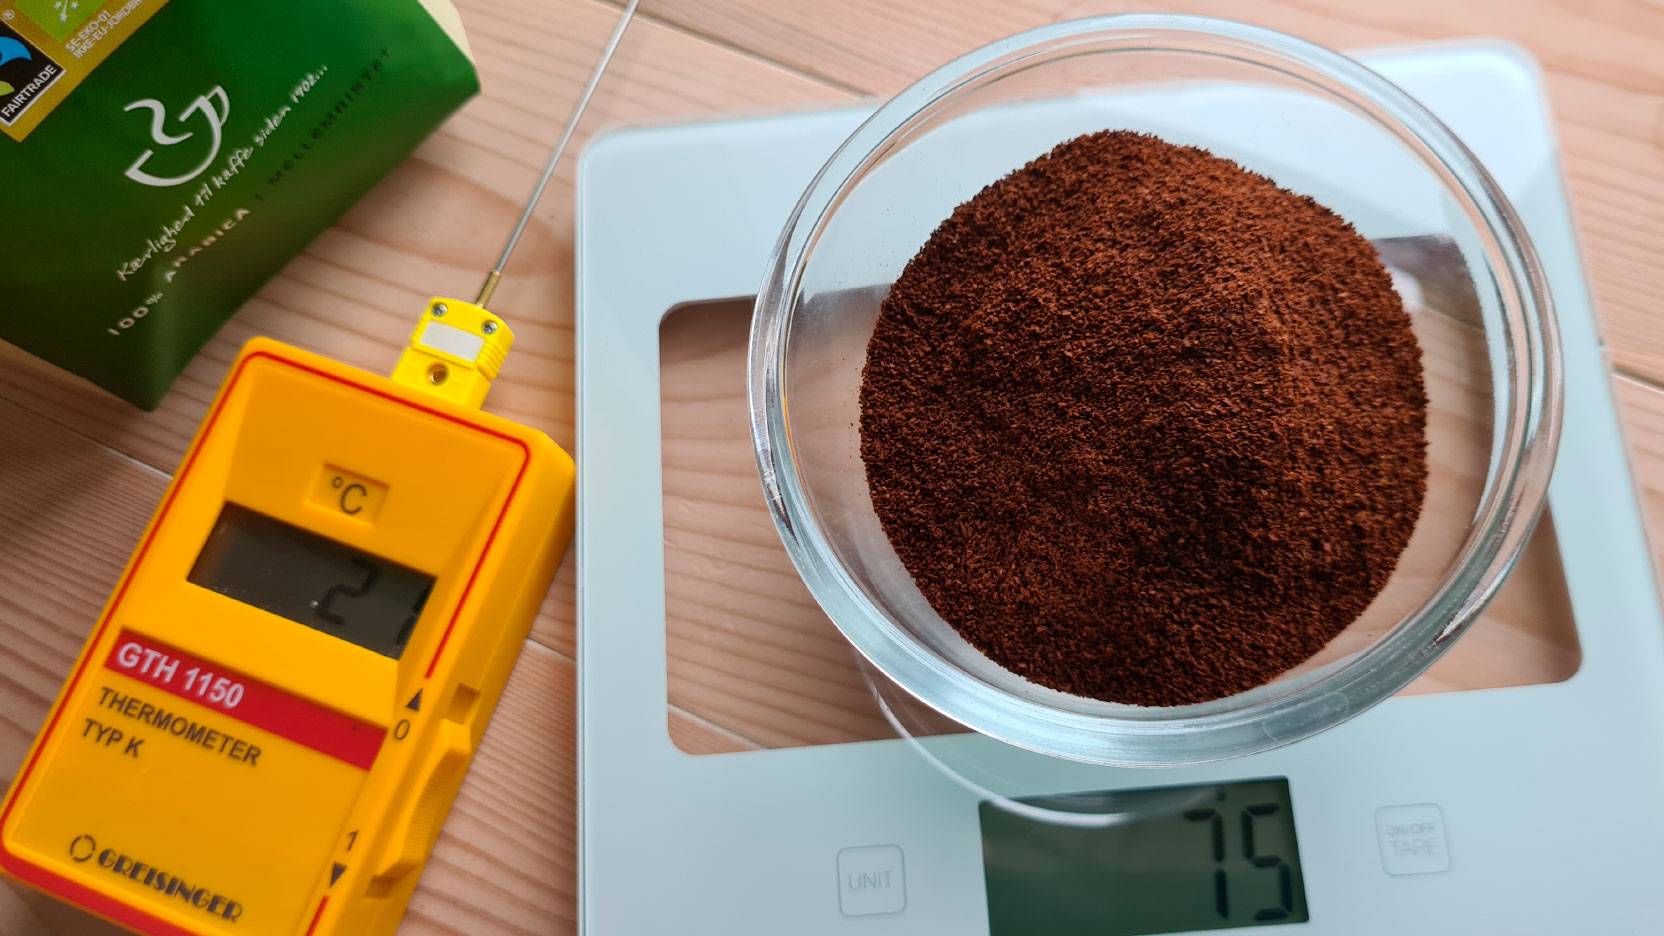 Image of coffee on the scales and the thermometer used in the testing of the coffee machines